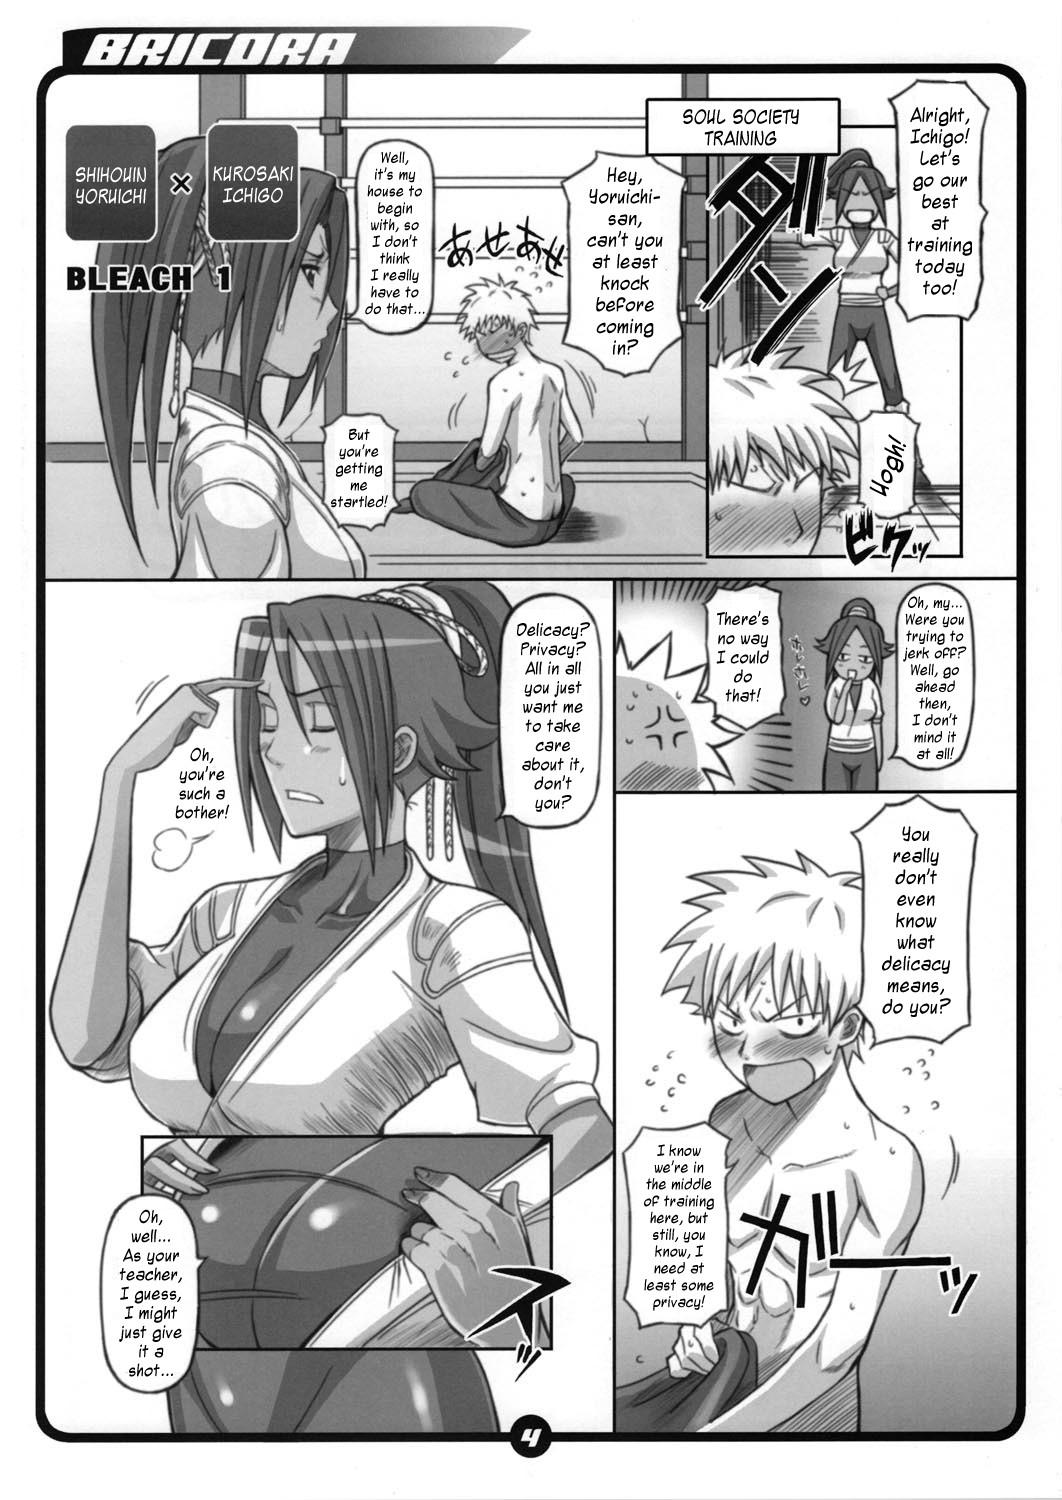 Special Locations BRICOLA - Bleach Sologirl - Page 3